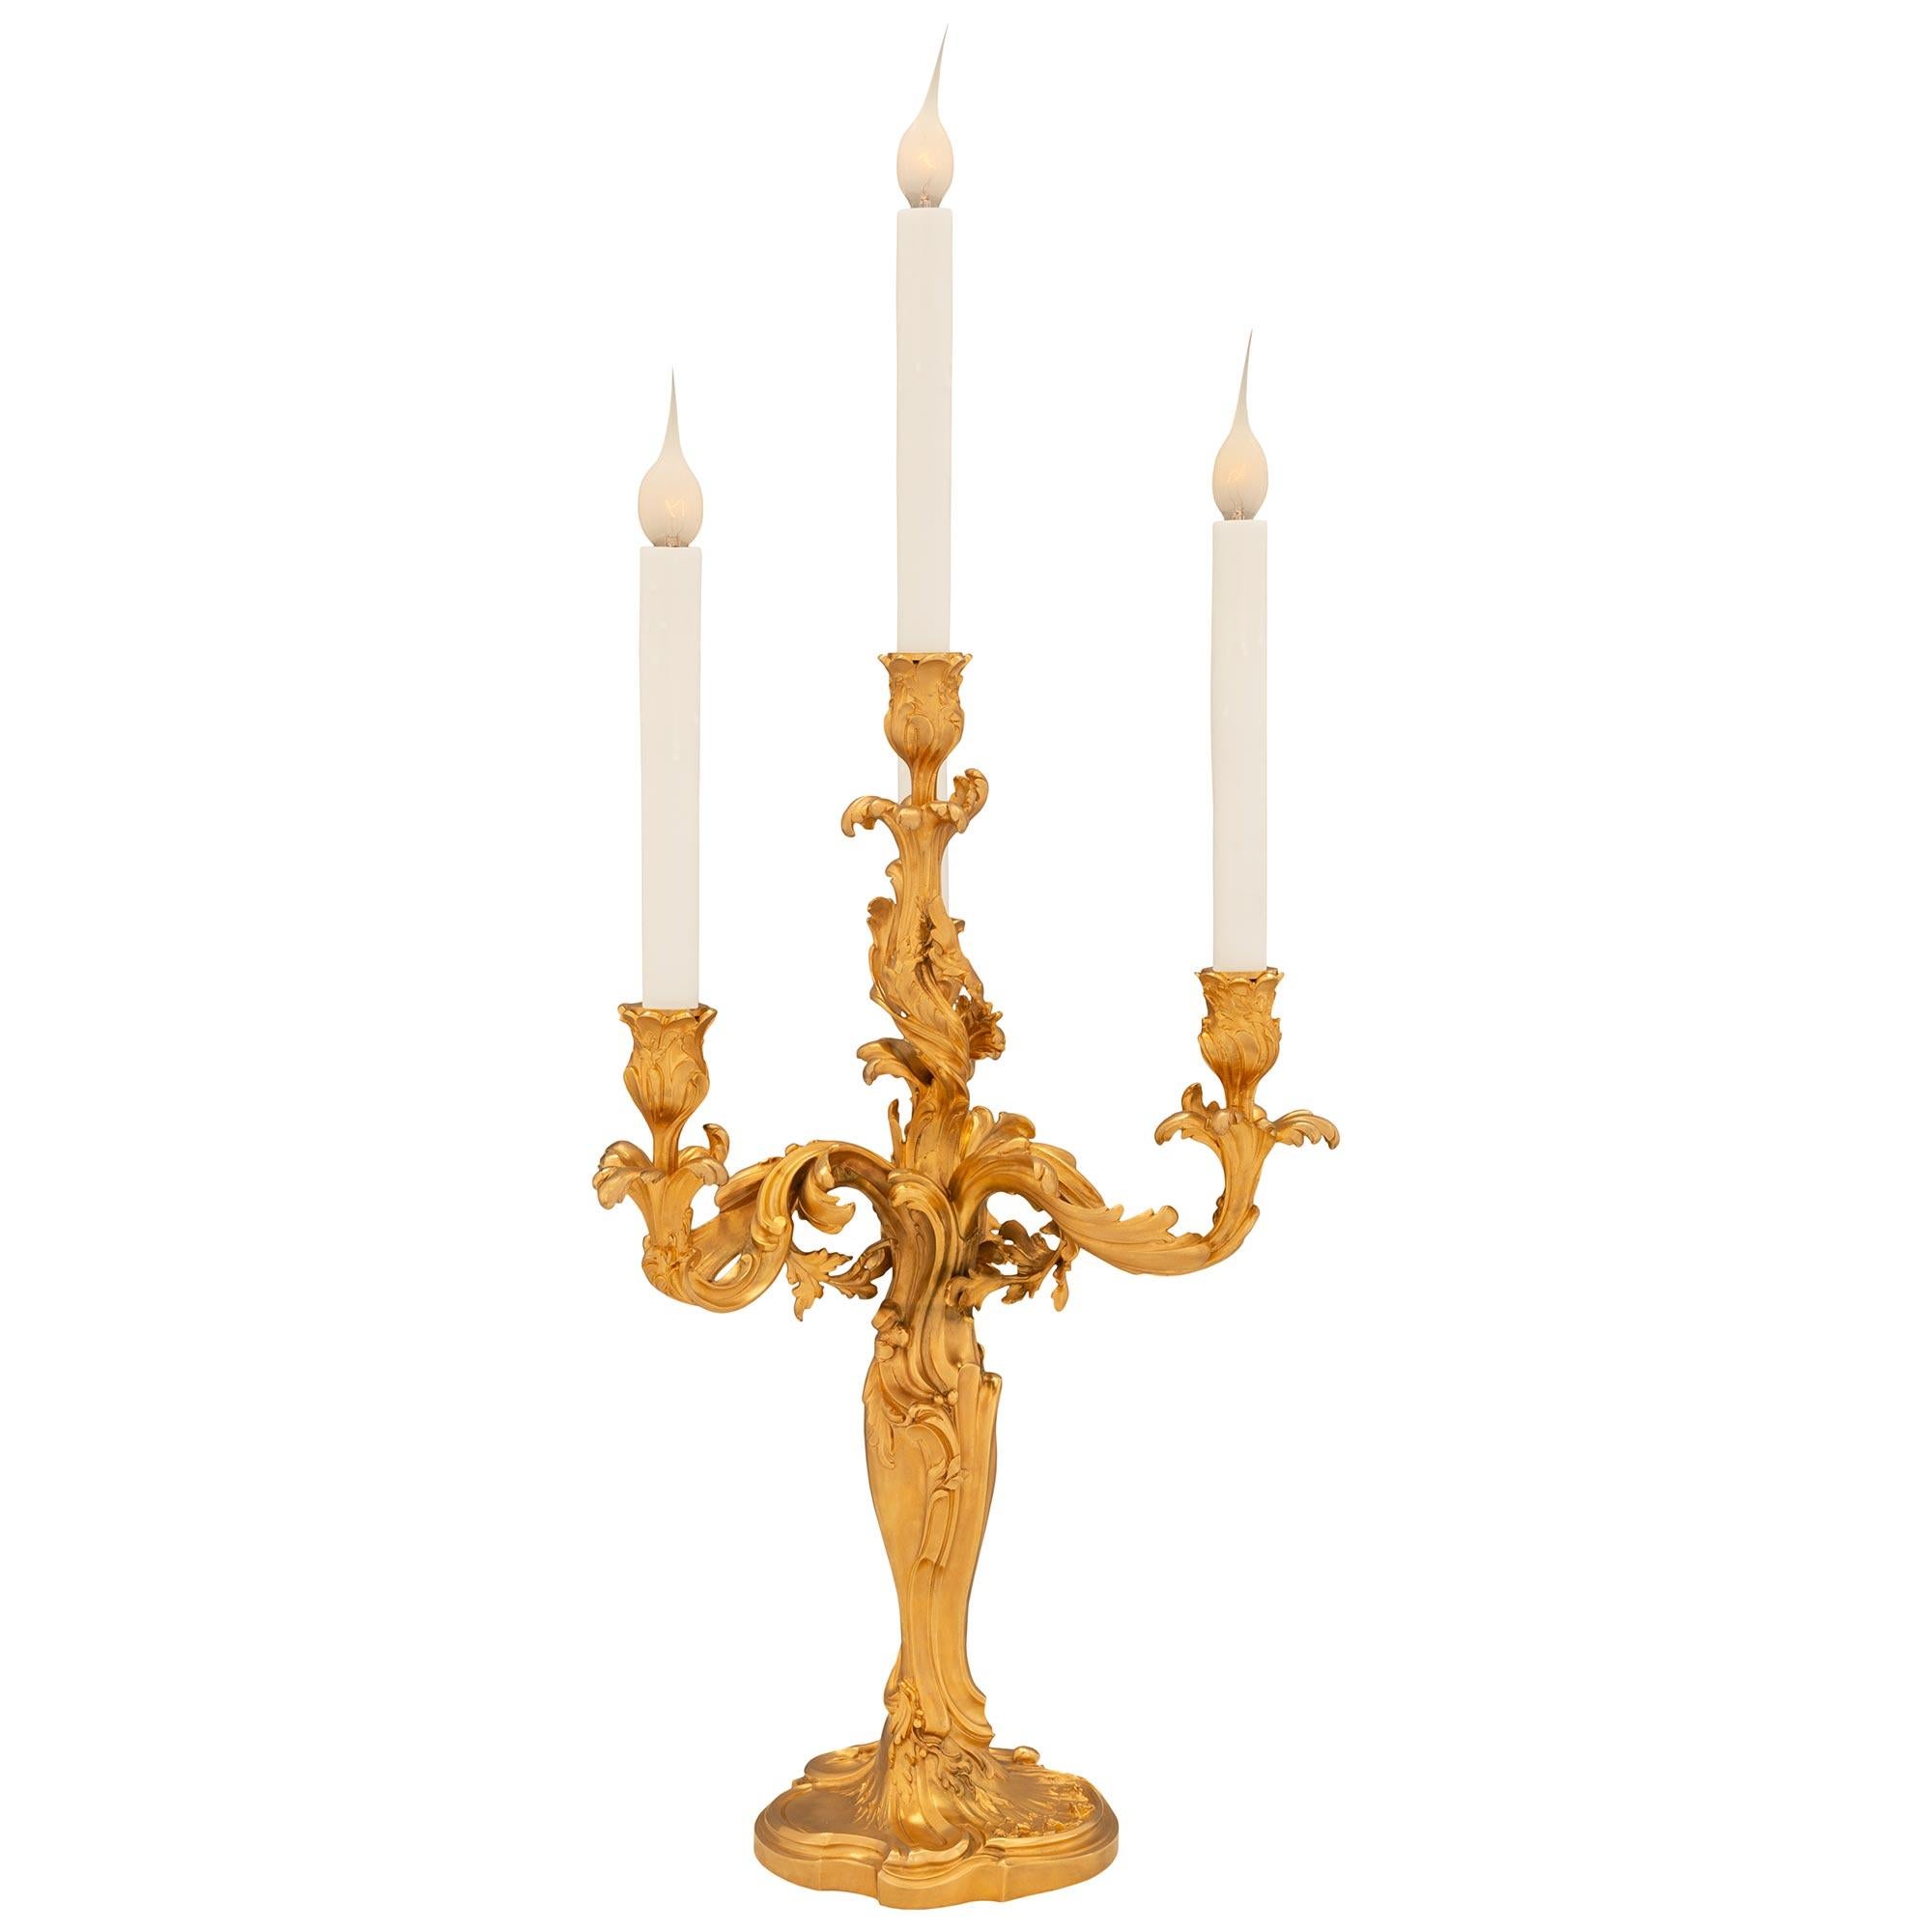 Pair Of French 19th Century Louis XV St. Ormolu Candelabras Signed E. Lelivevre In Good Condition For Sale In West Palm Beach, FL